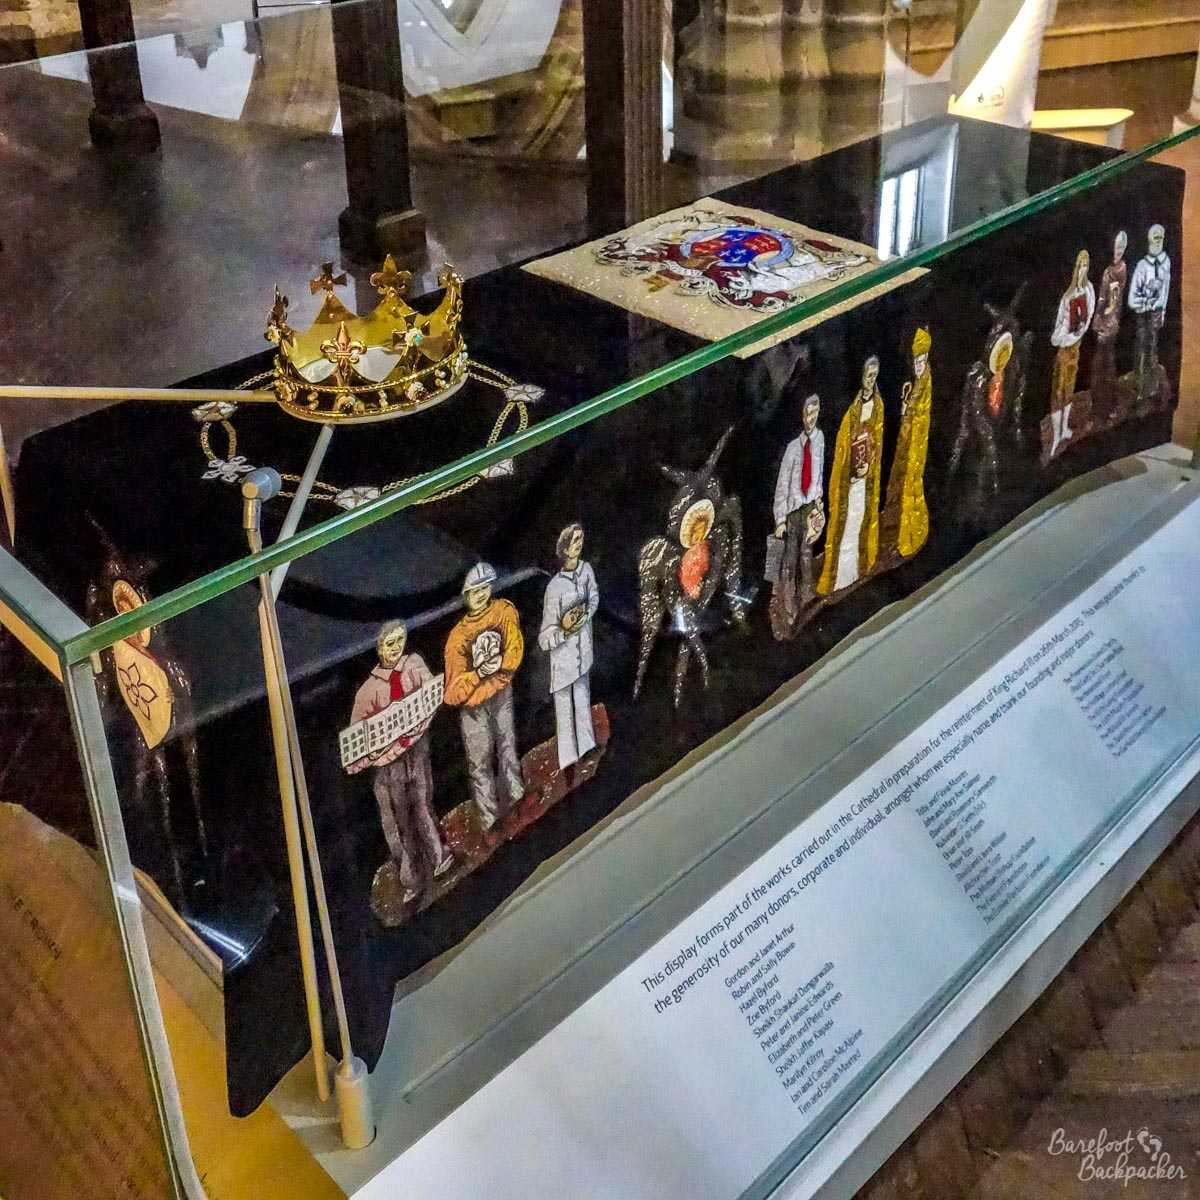 Memorial to King Richard III inside the cathedral, and replica of his crown.